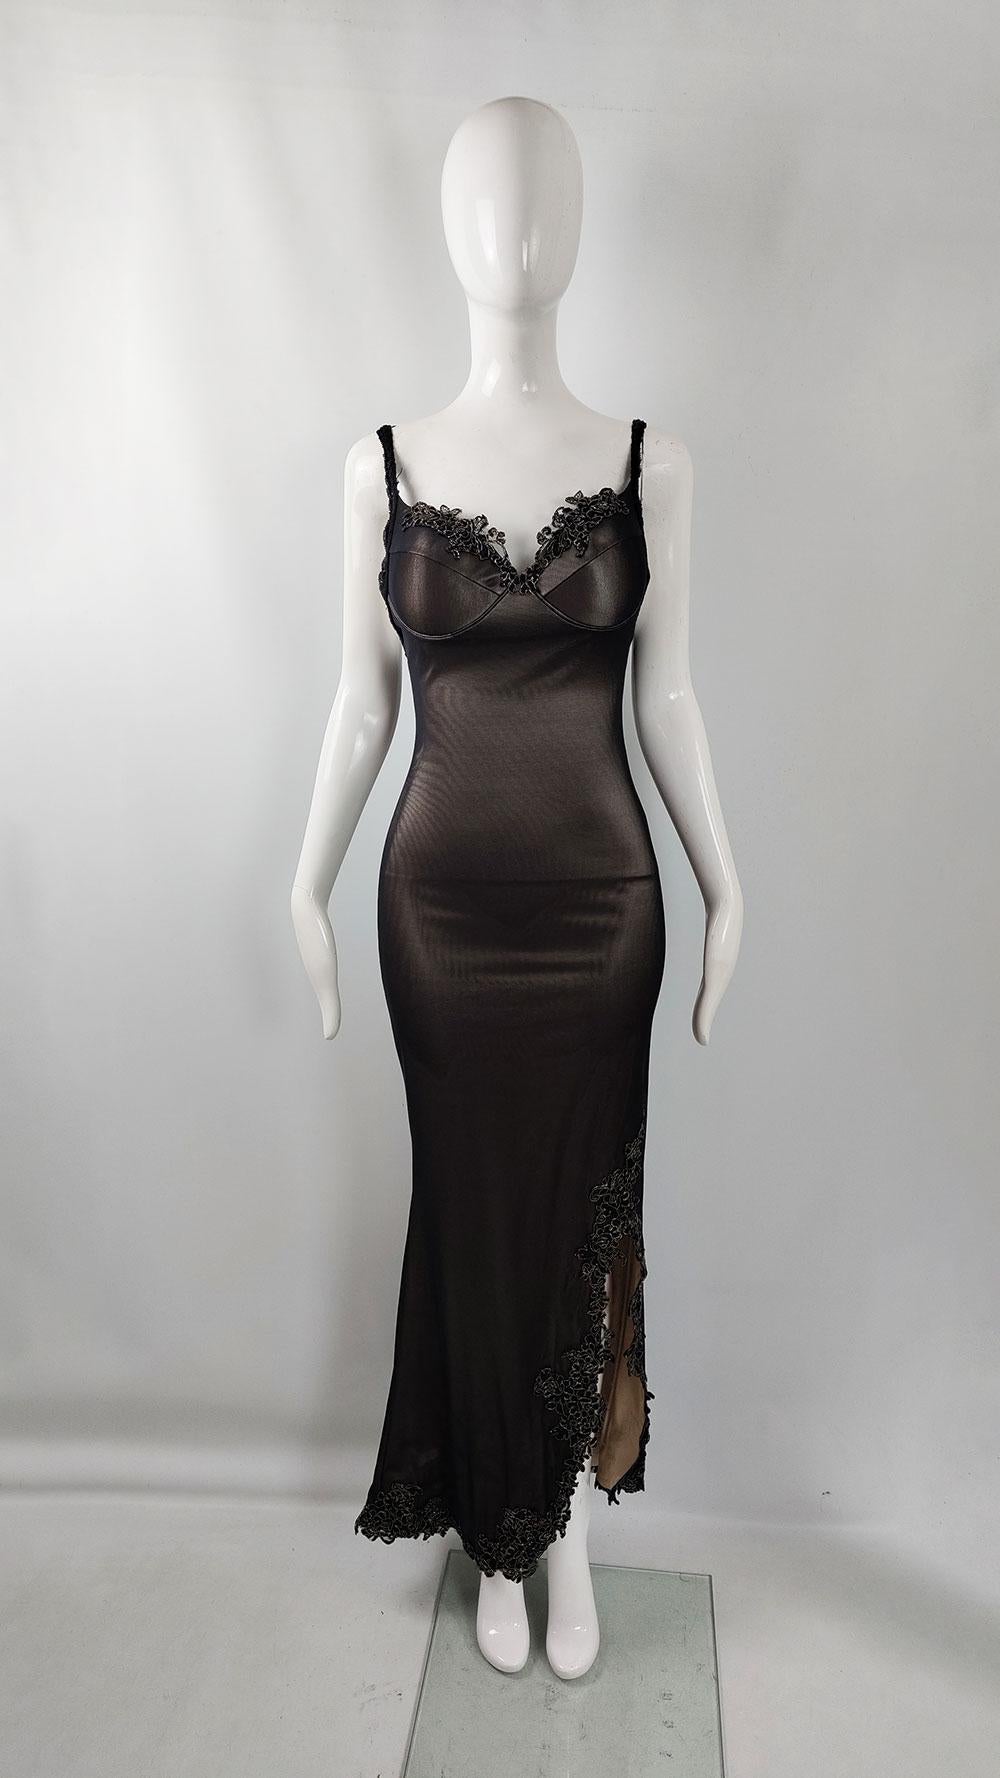 A captivating 2000s vintage women's dress by the iconic British label Catwalk Collection, known for sensual eveningwear. This dress, made from black mesh over flesh-colored stretch jersey, creates a pale gold/brownish effect from afar. It features